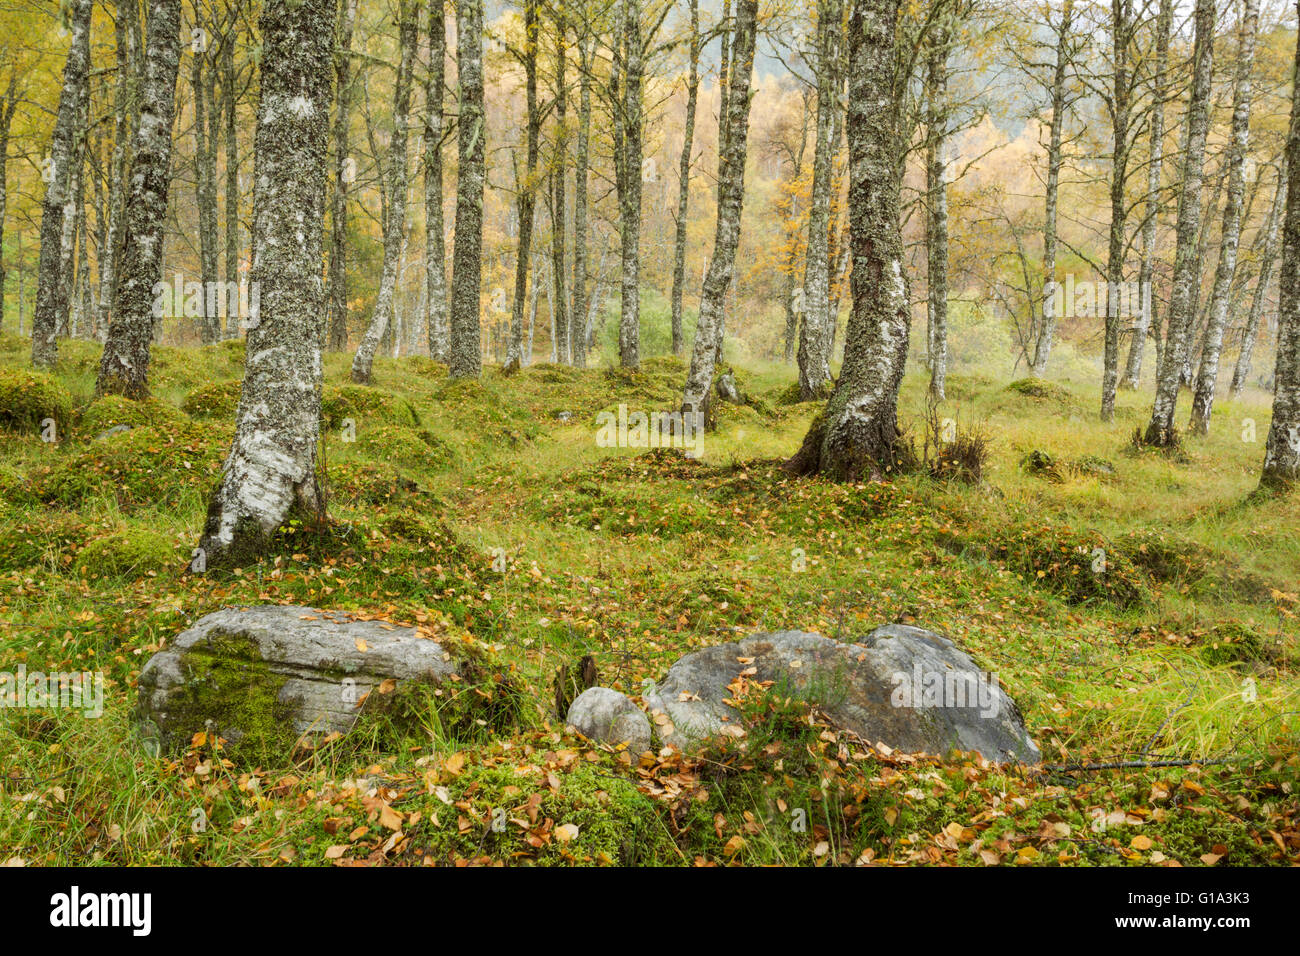 Leaves lying on grass and moss in a birch woodland during autumn Stock Photo